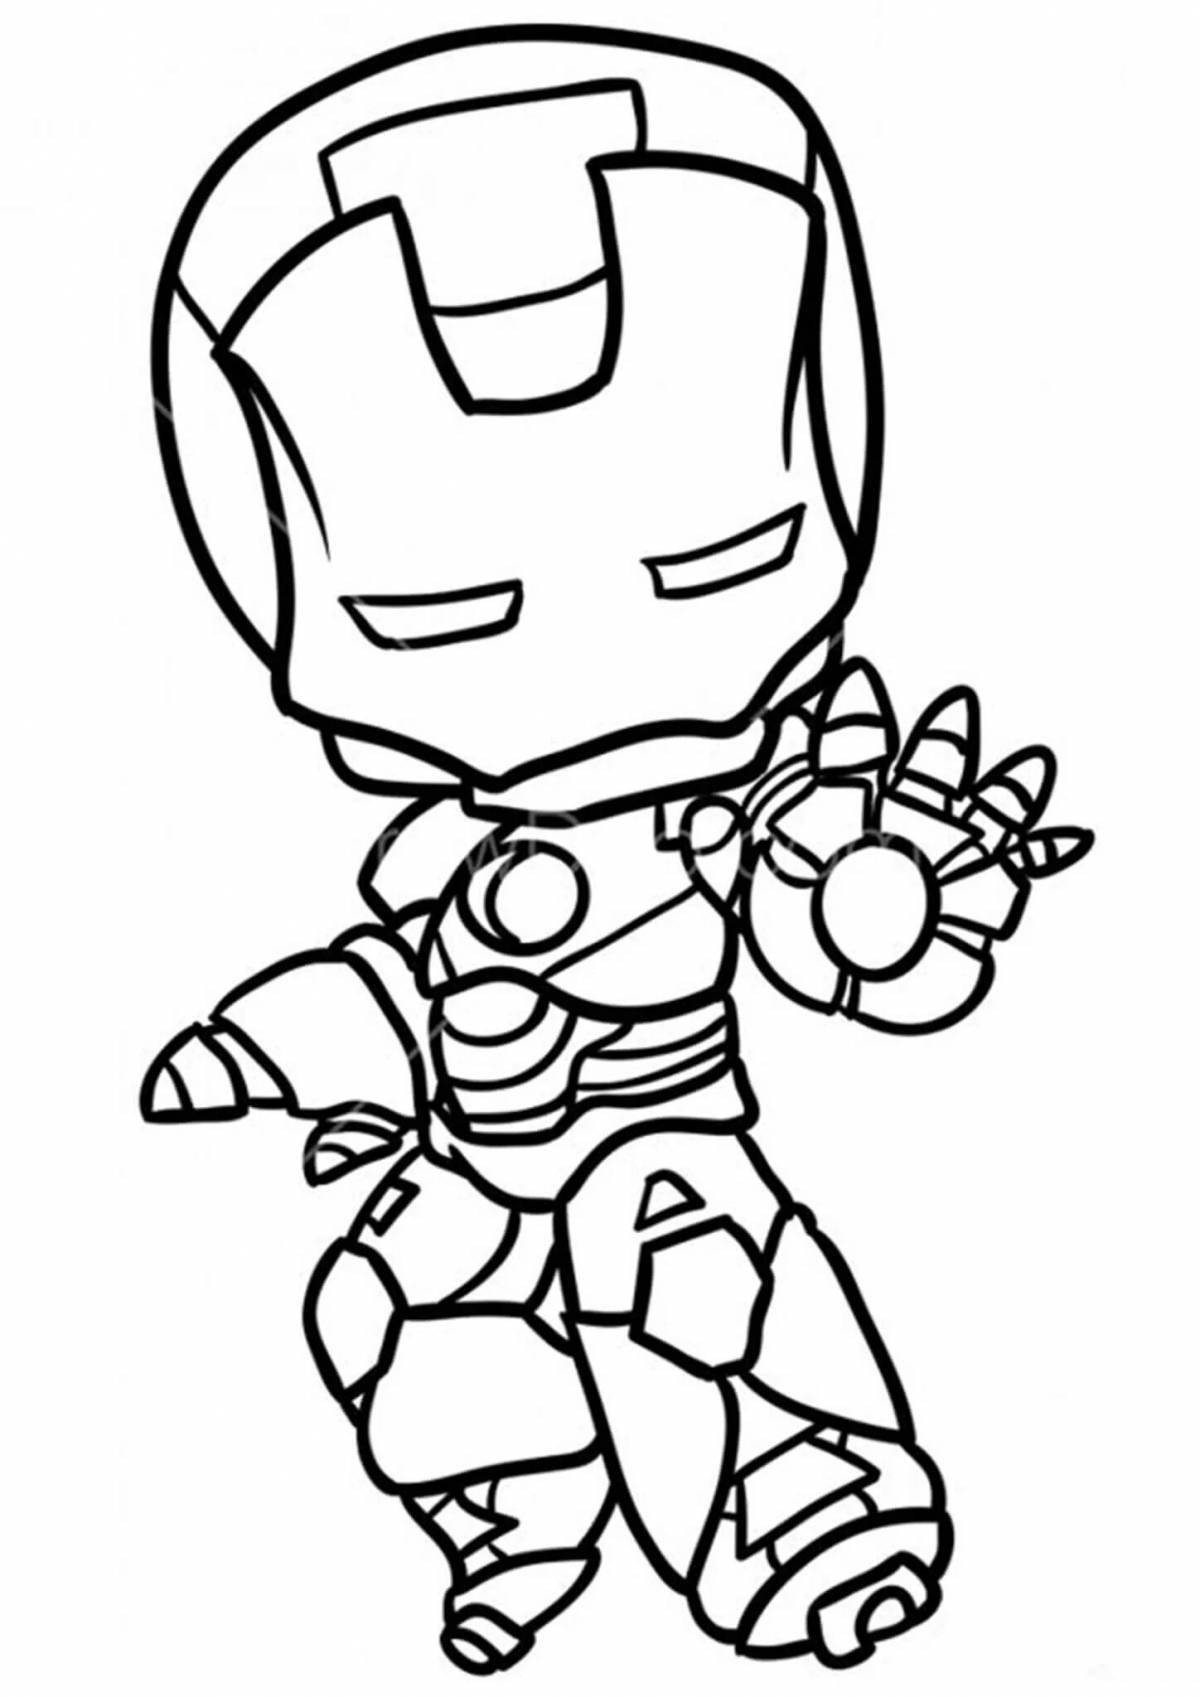 Coloring book glowing iron man marvel